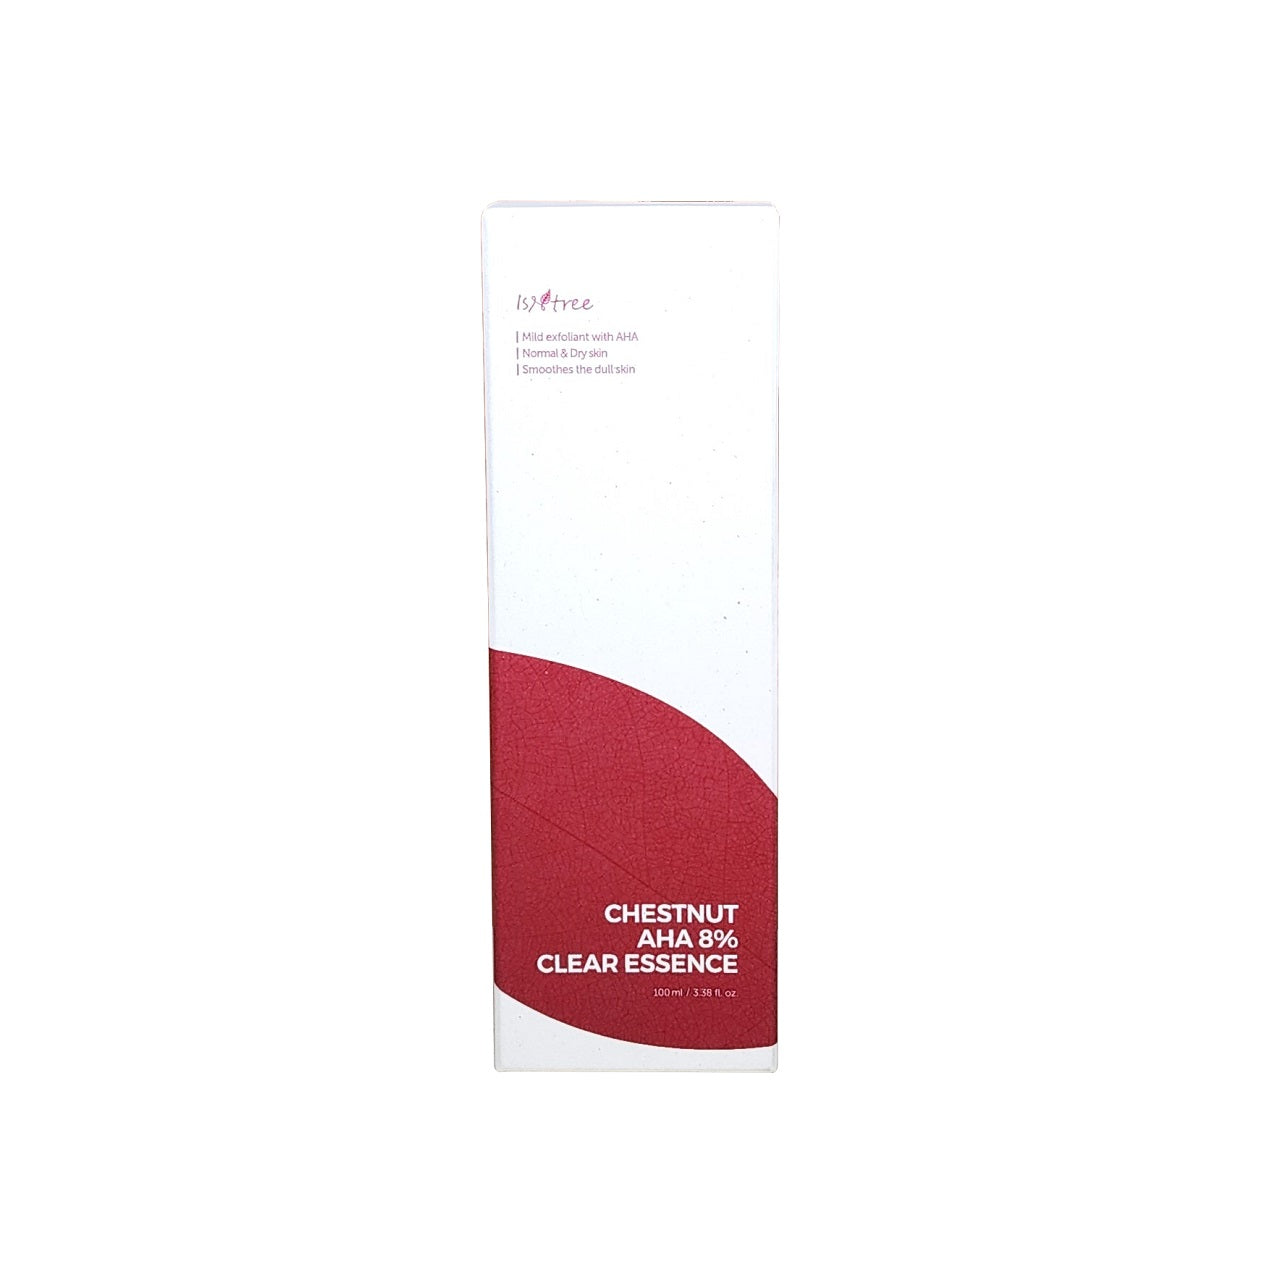 Product label for Isntree Chestnut AHA 8% Clear Essence (100 mL)